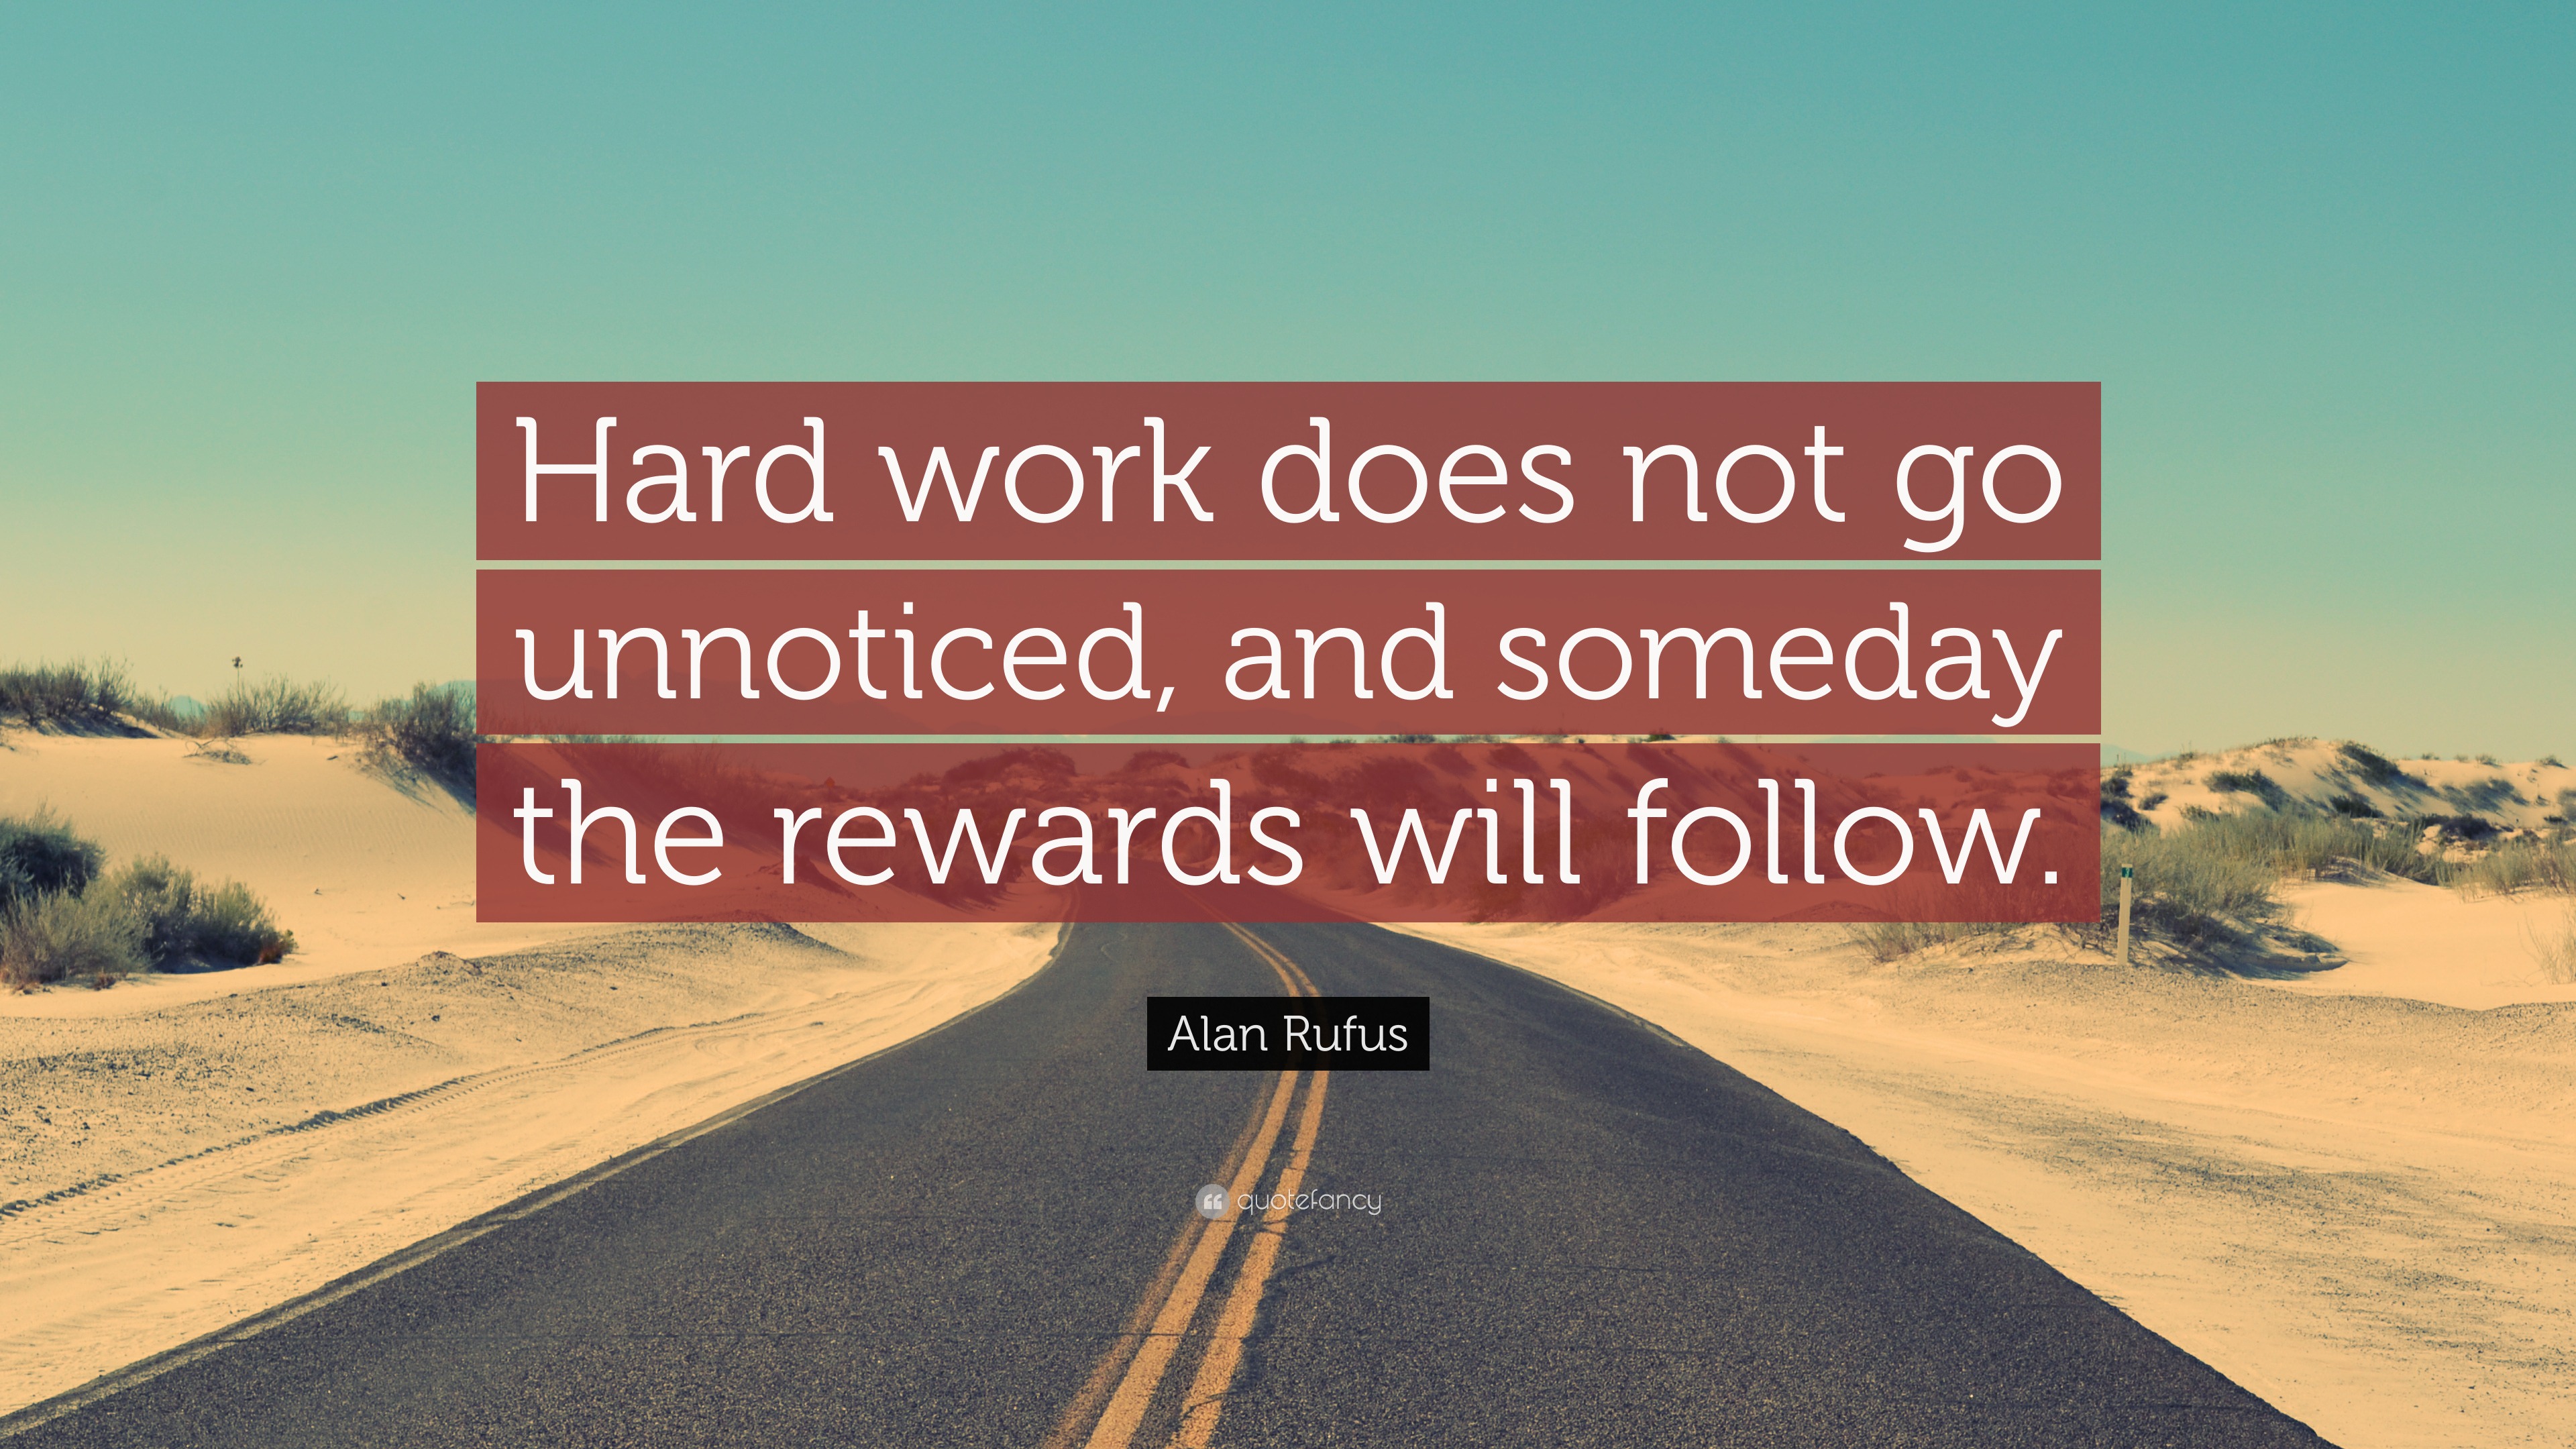 Alan Rufus Quote: “Hard work does not go unnoticed, and someday the rewards  will follow.”